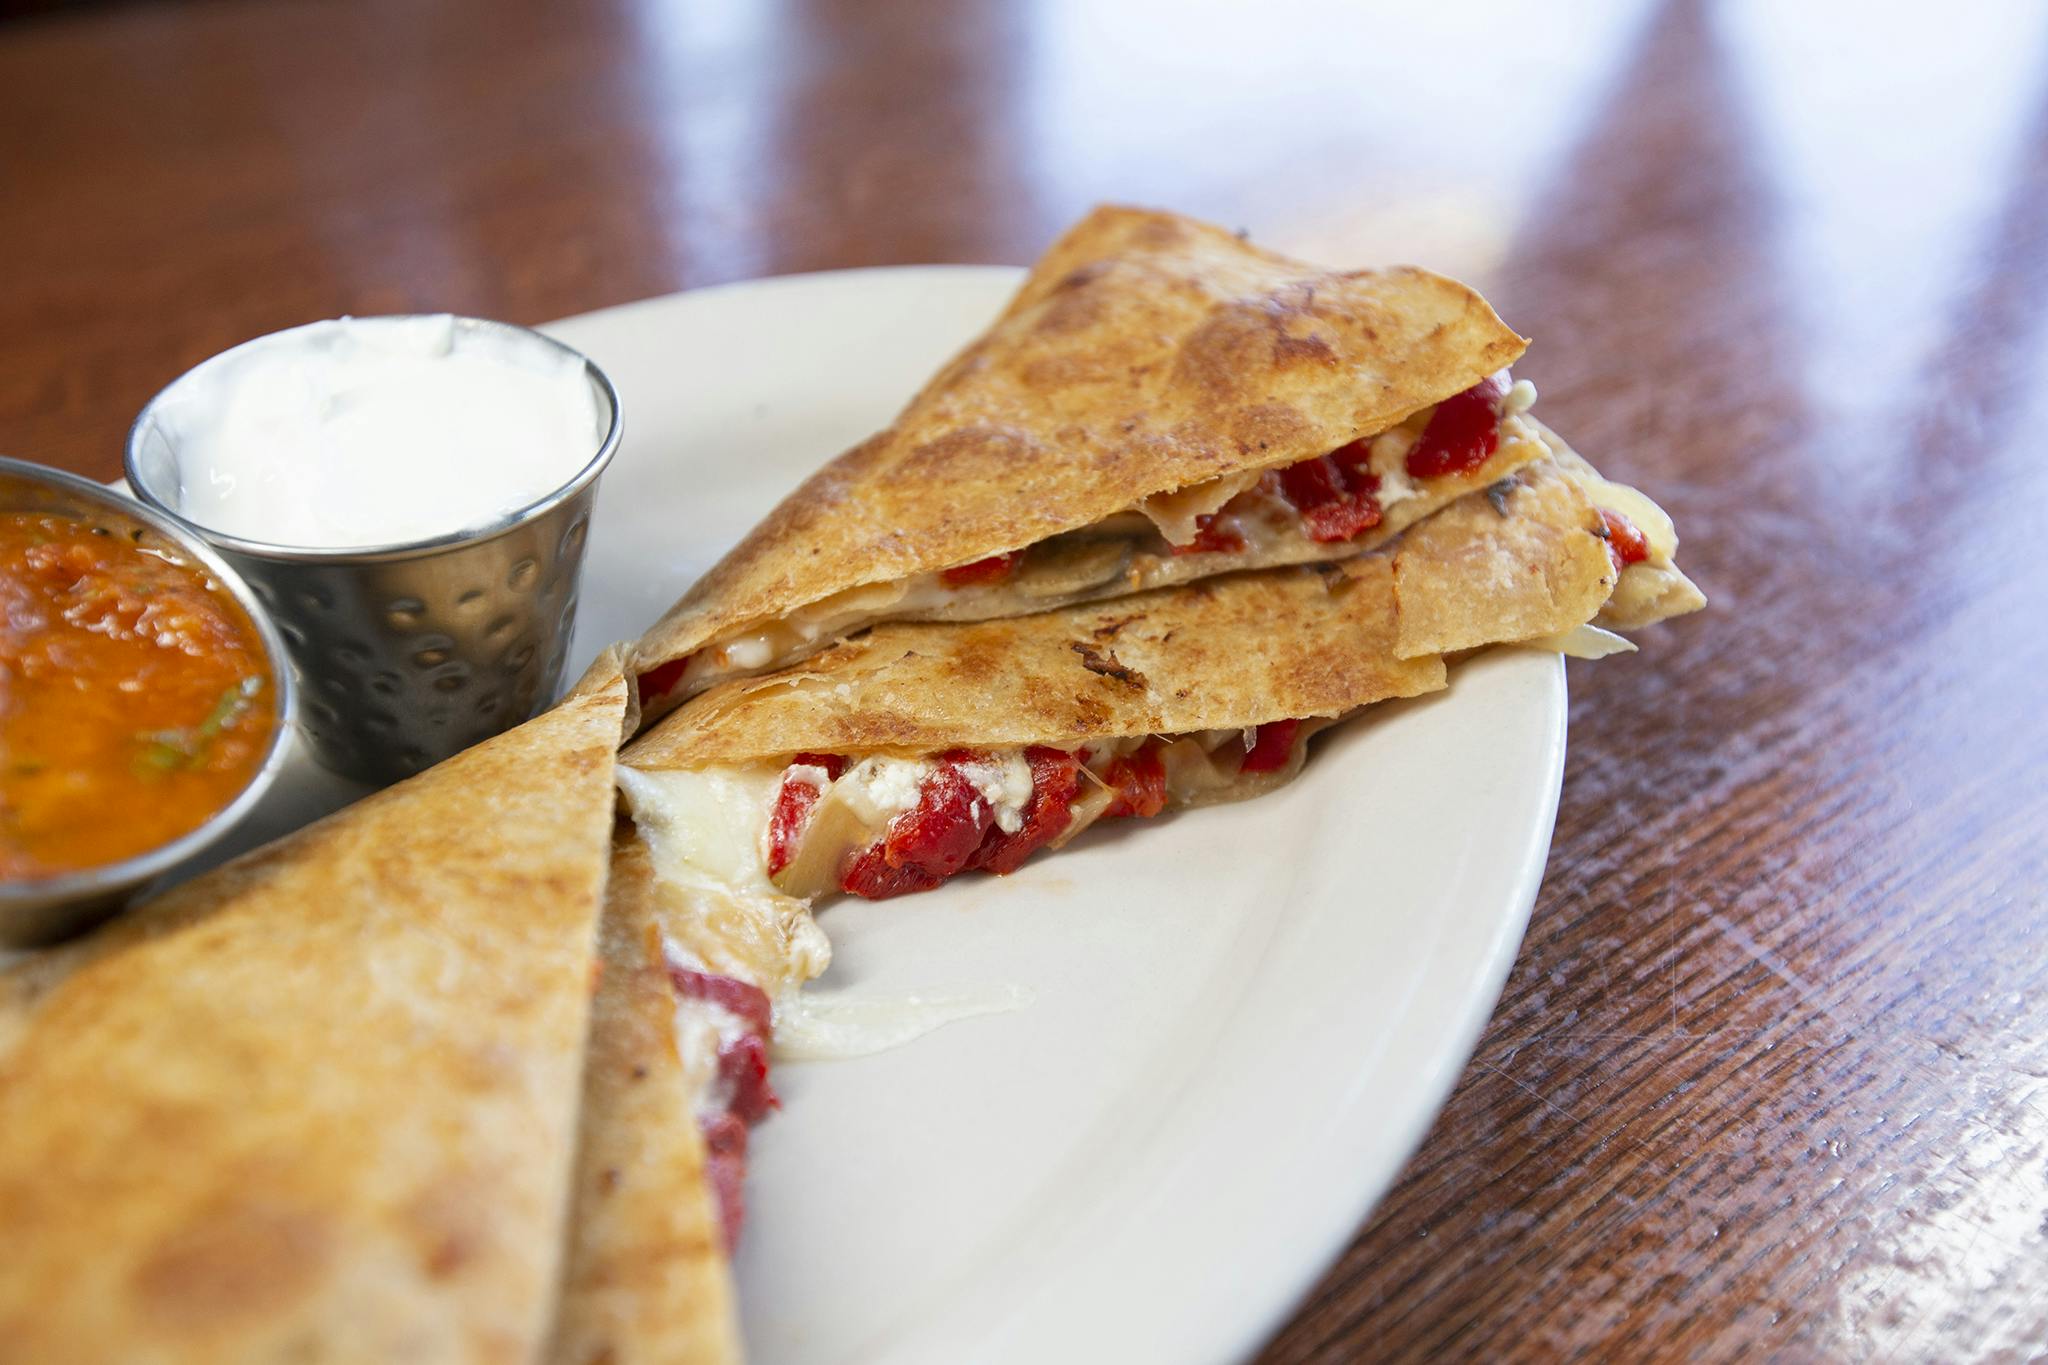 Veggie Quesadillas from Candlelite Chicago in Chicago, IL